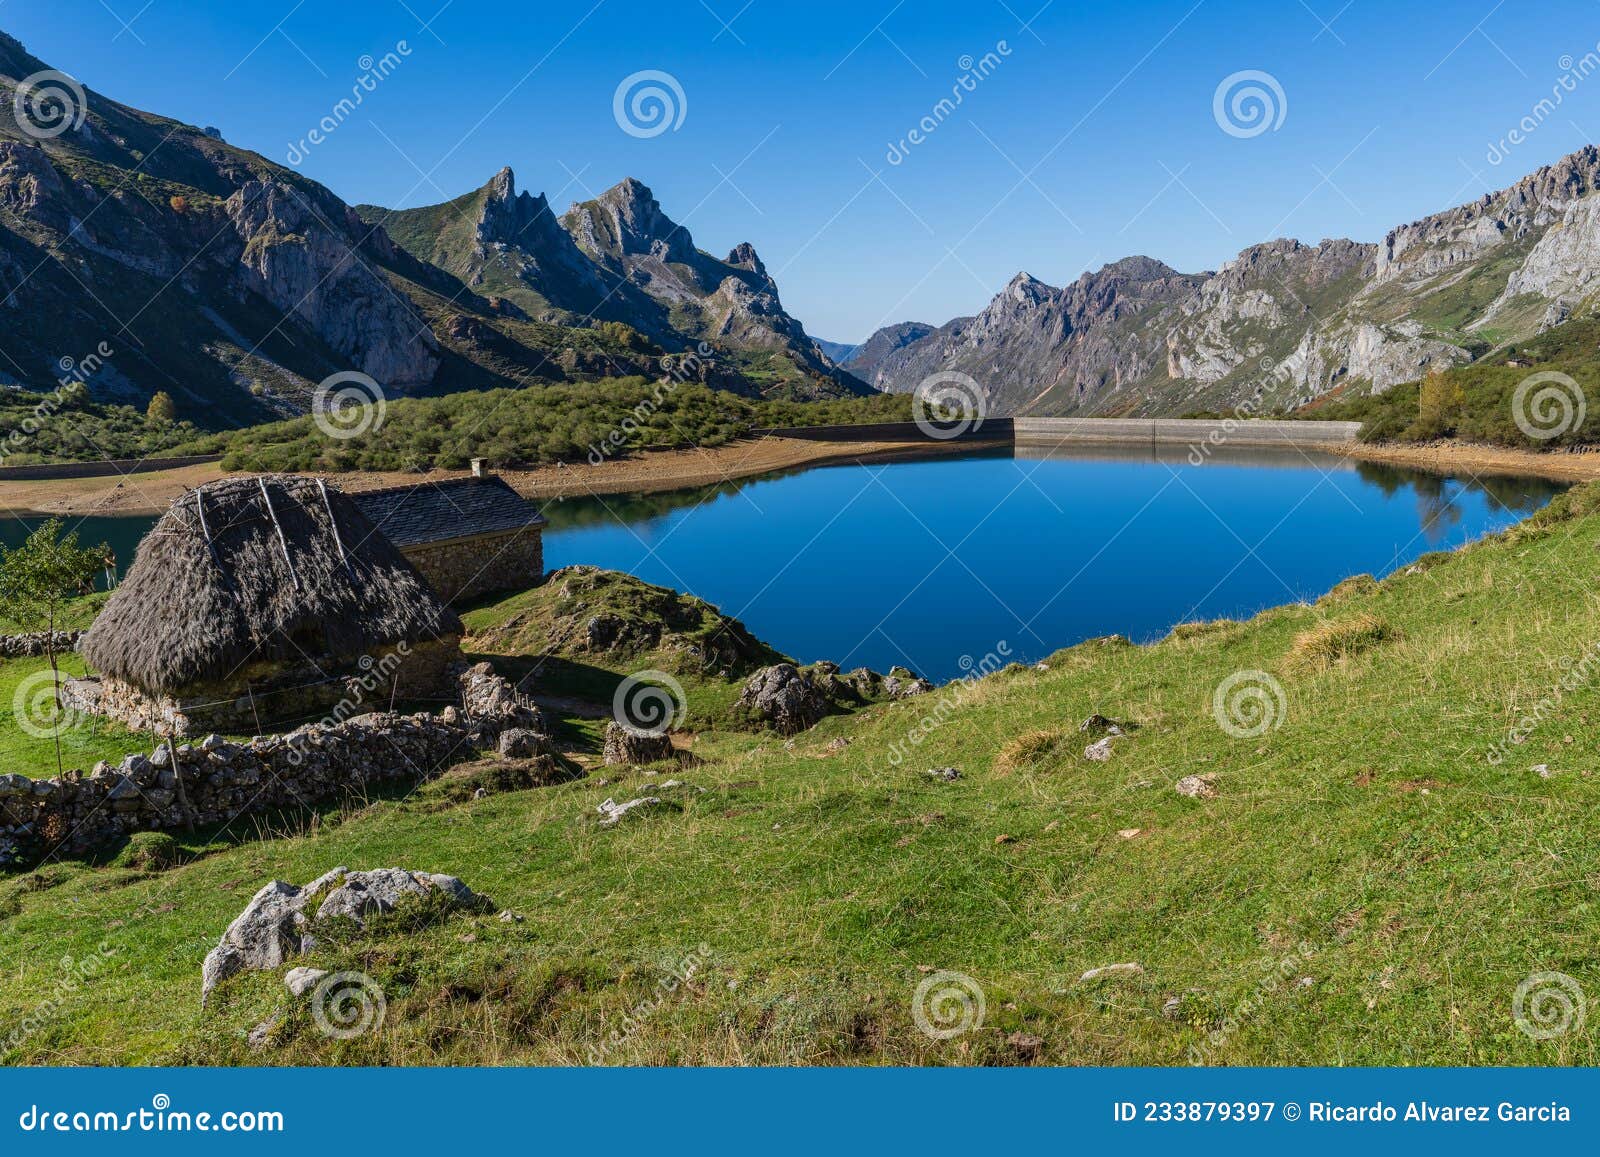 view of the lake of the valley in the somiedo natural park in asturias.